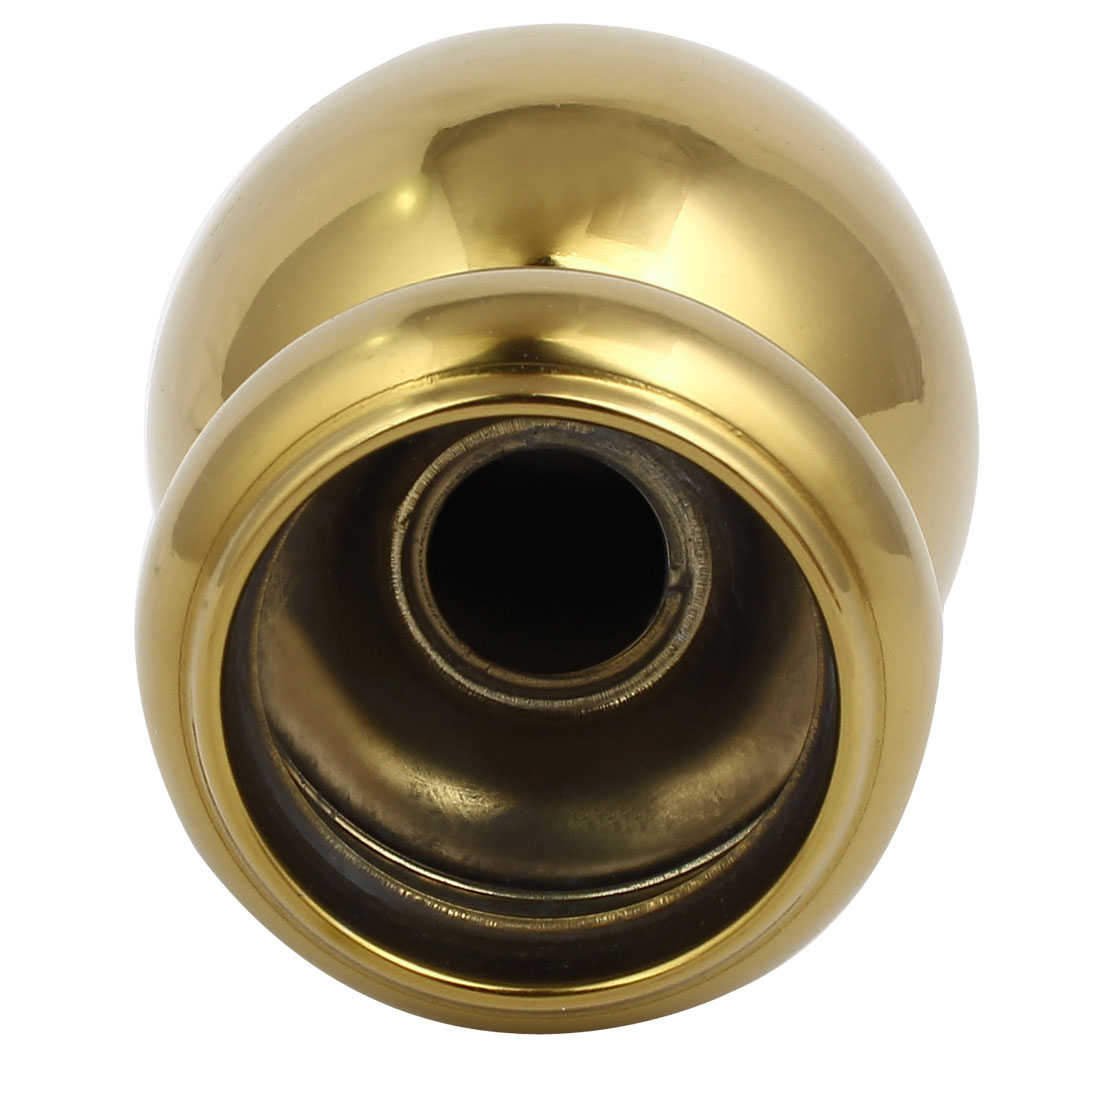 60mm Ball Top Cap 201 Stainless Steel Gold Tone for Stair Newel Fence Post